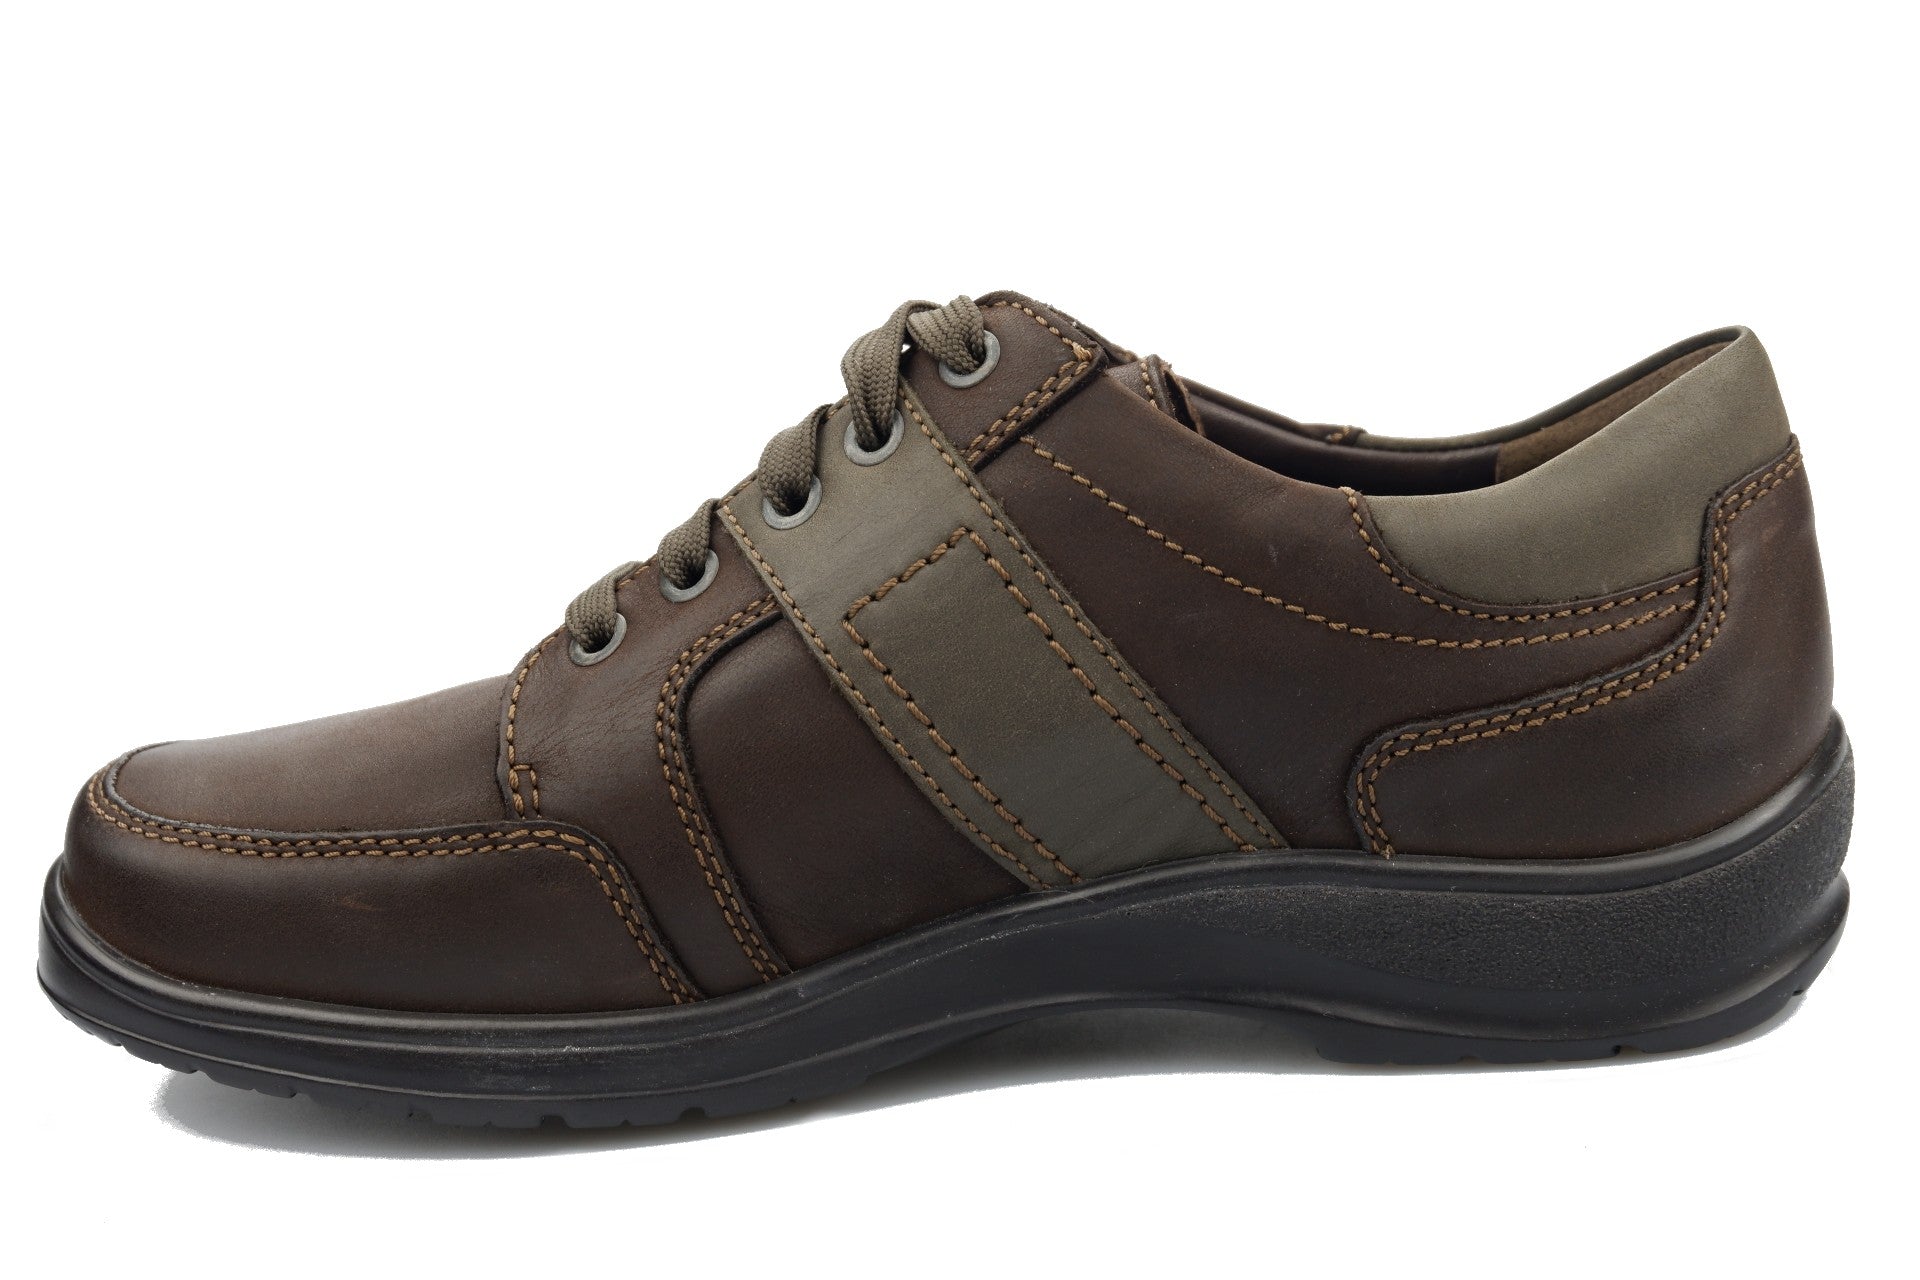 'Edward' men's wide fit lace up shoe from Mobils by Mephisto - Chaplinshoes'Edward' men's wide fit lace up shoe from Mobils by MephistoMephisto